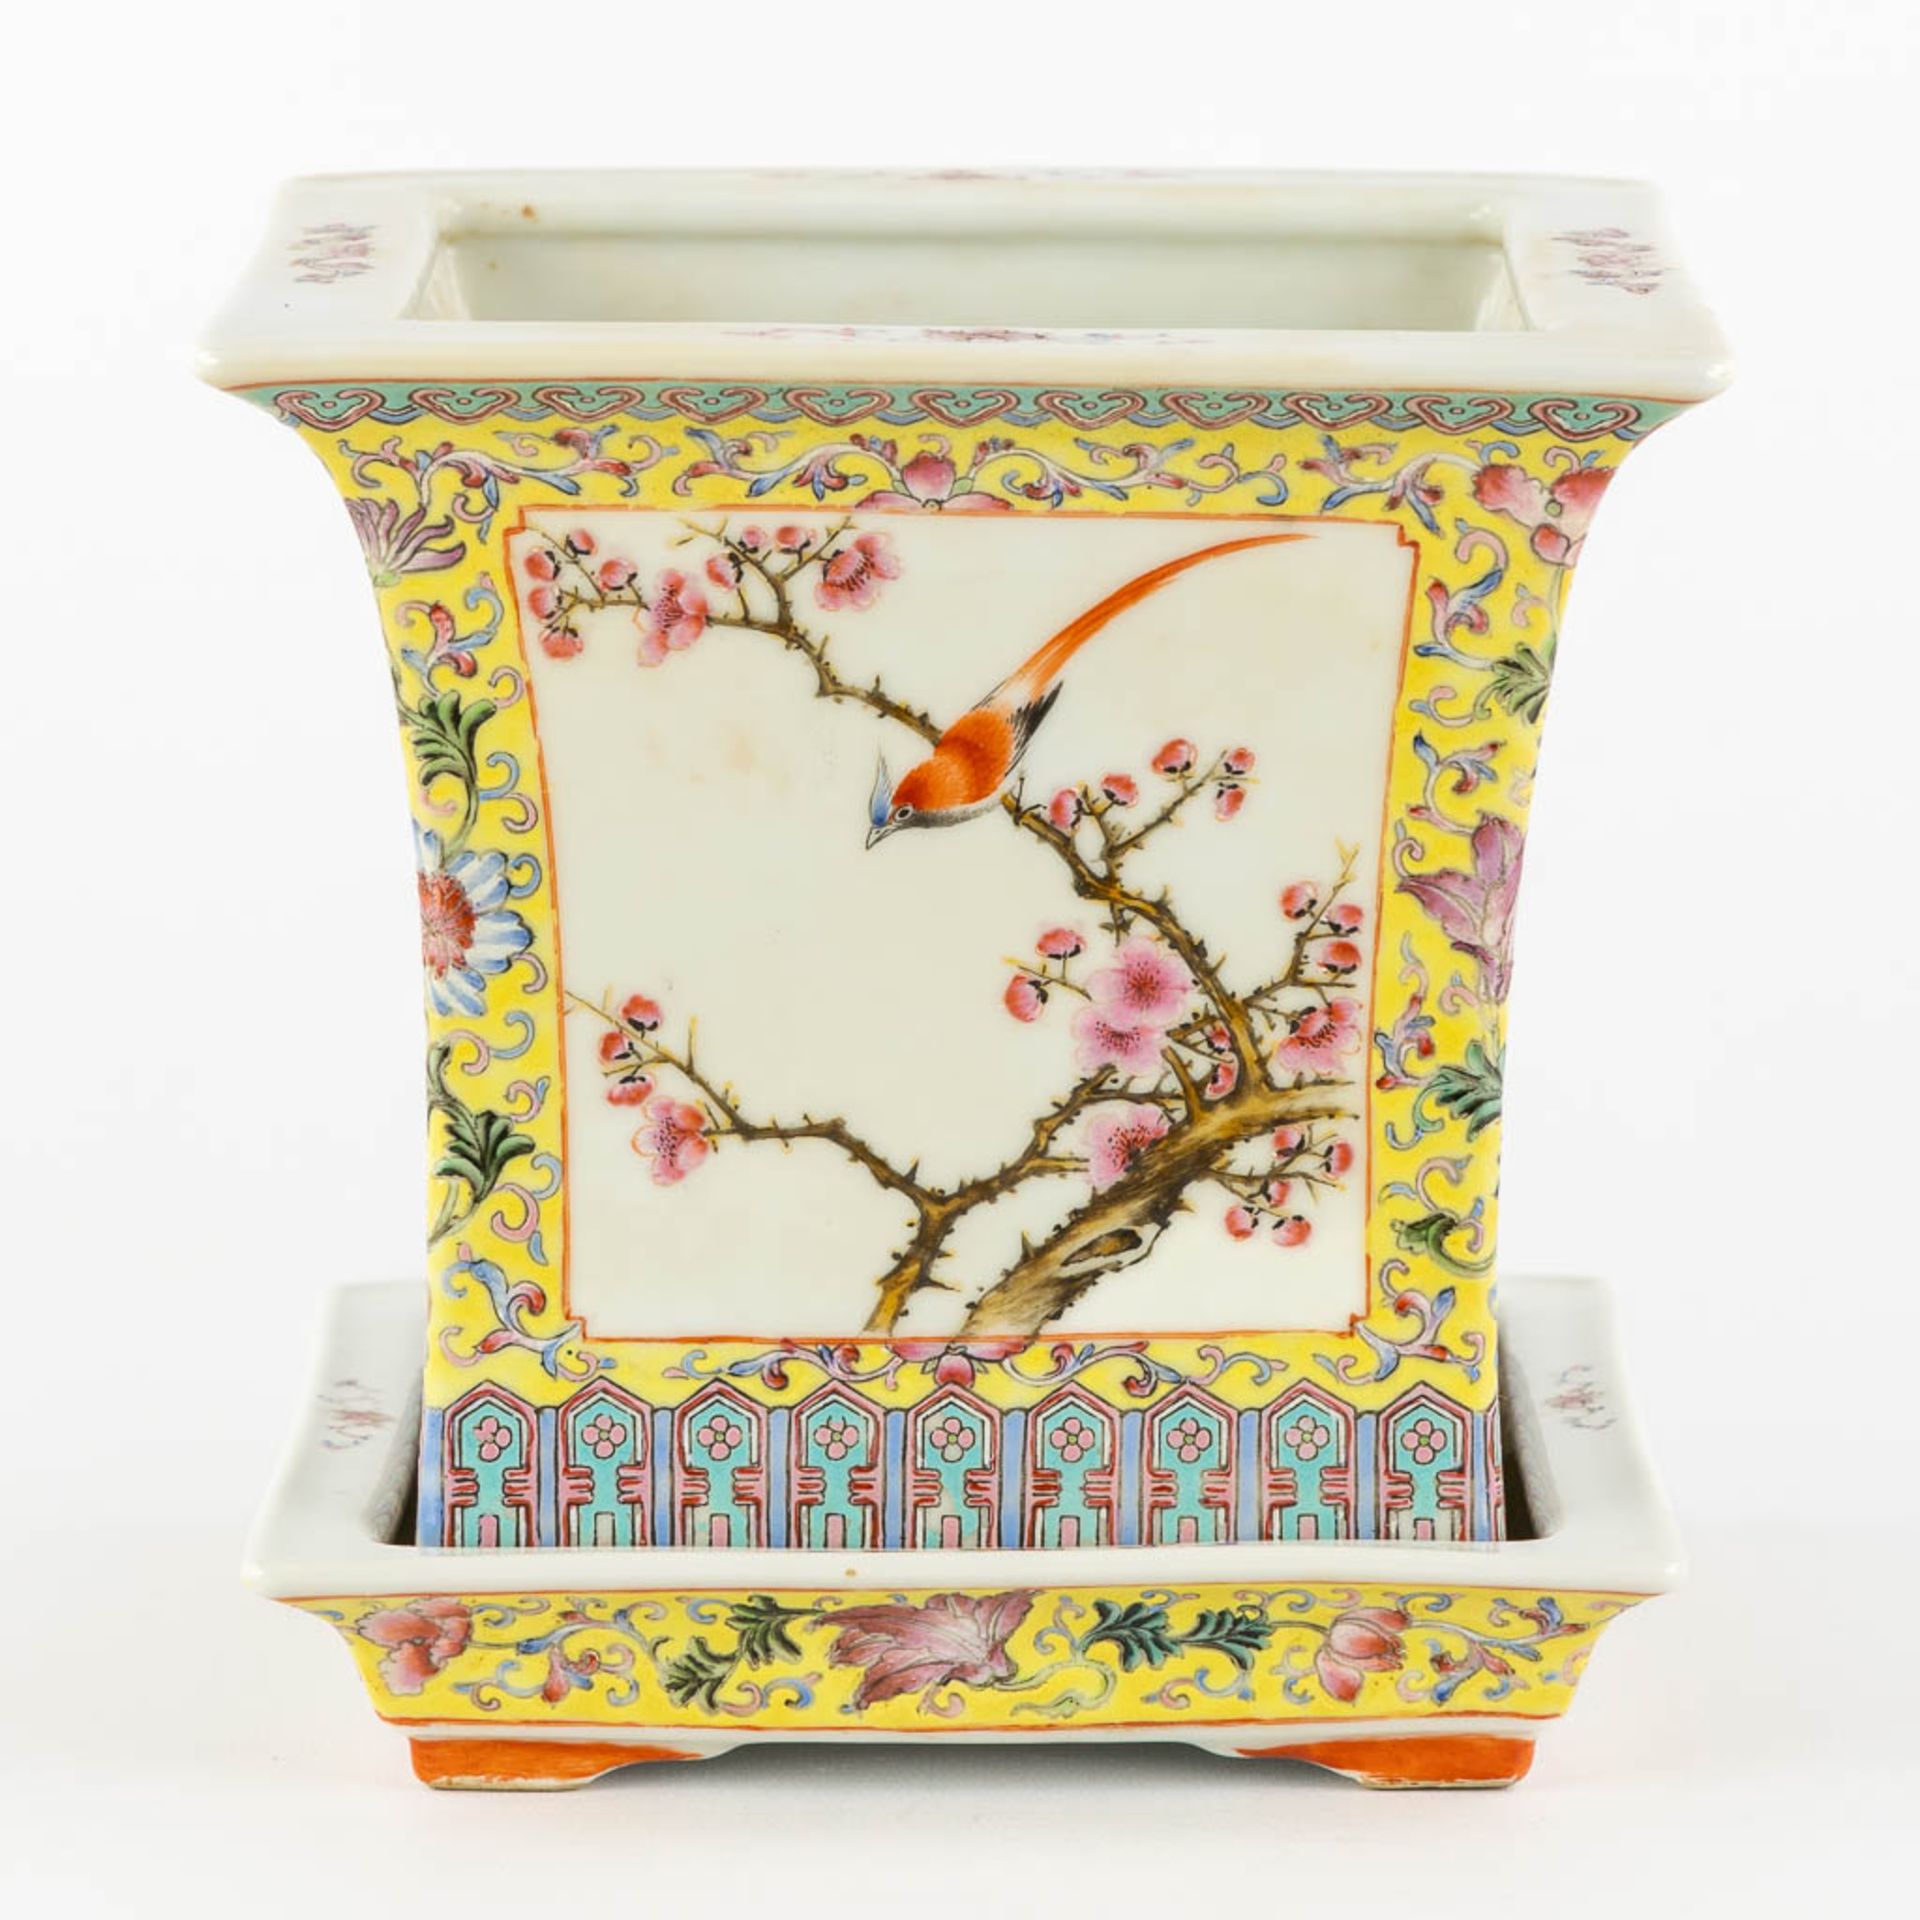 A Chinese Cache Pot, Famille Rose decorated with fauna and flora. (L:18 x W:18 x H:17,5 cm) - Image 4 of 13